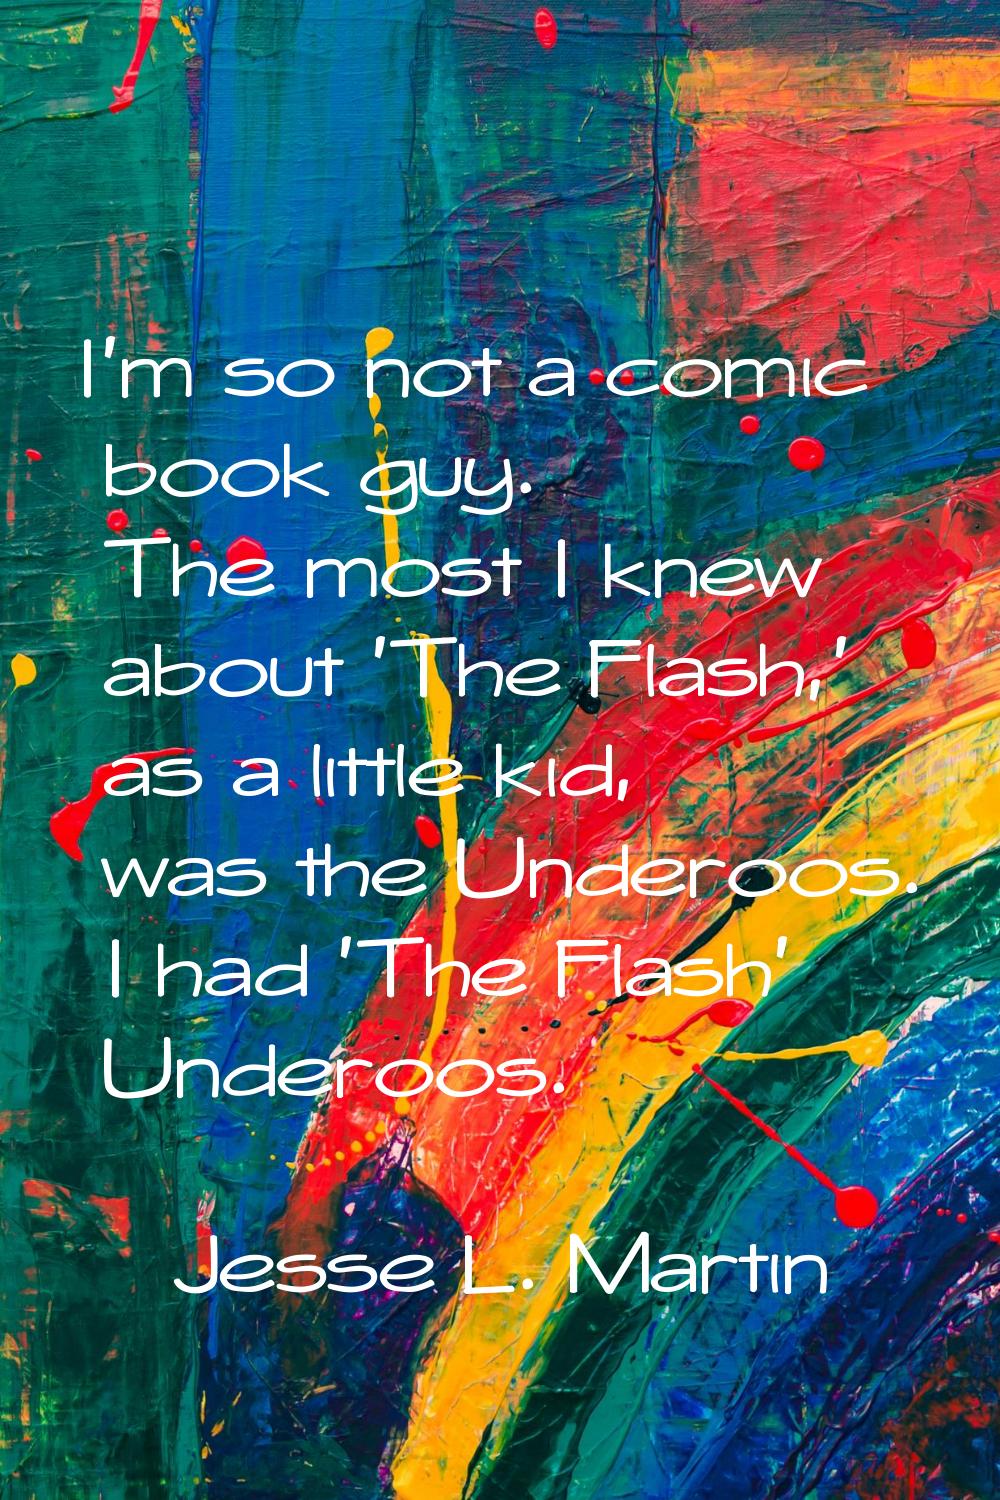 I'm so not a comic book guy. The most I knew about 'The Flash,' as a little kid, was the Underoos. 